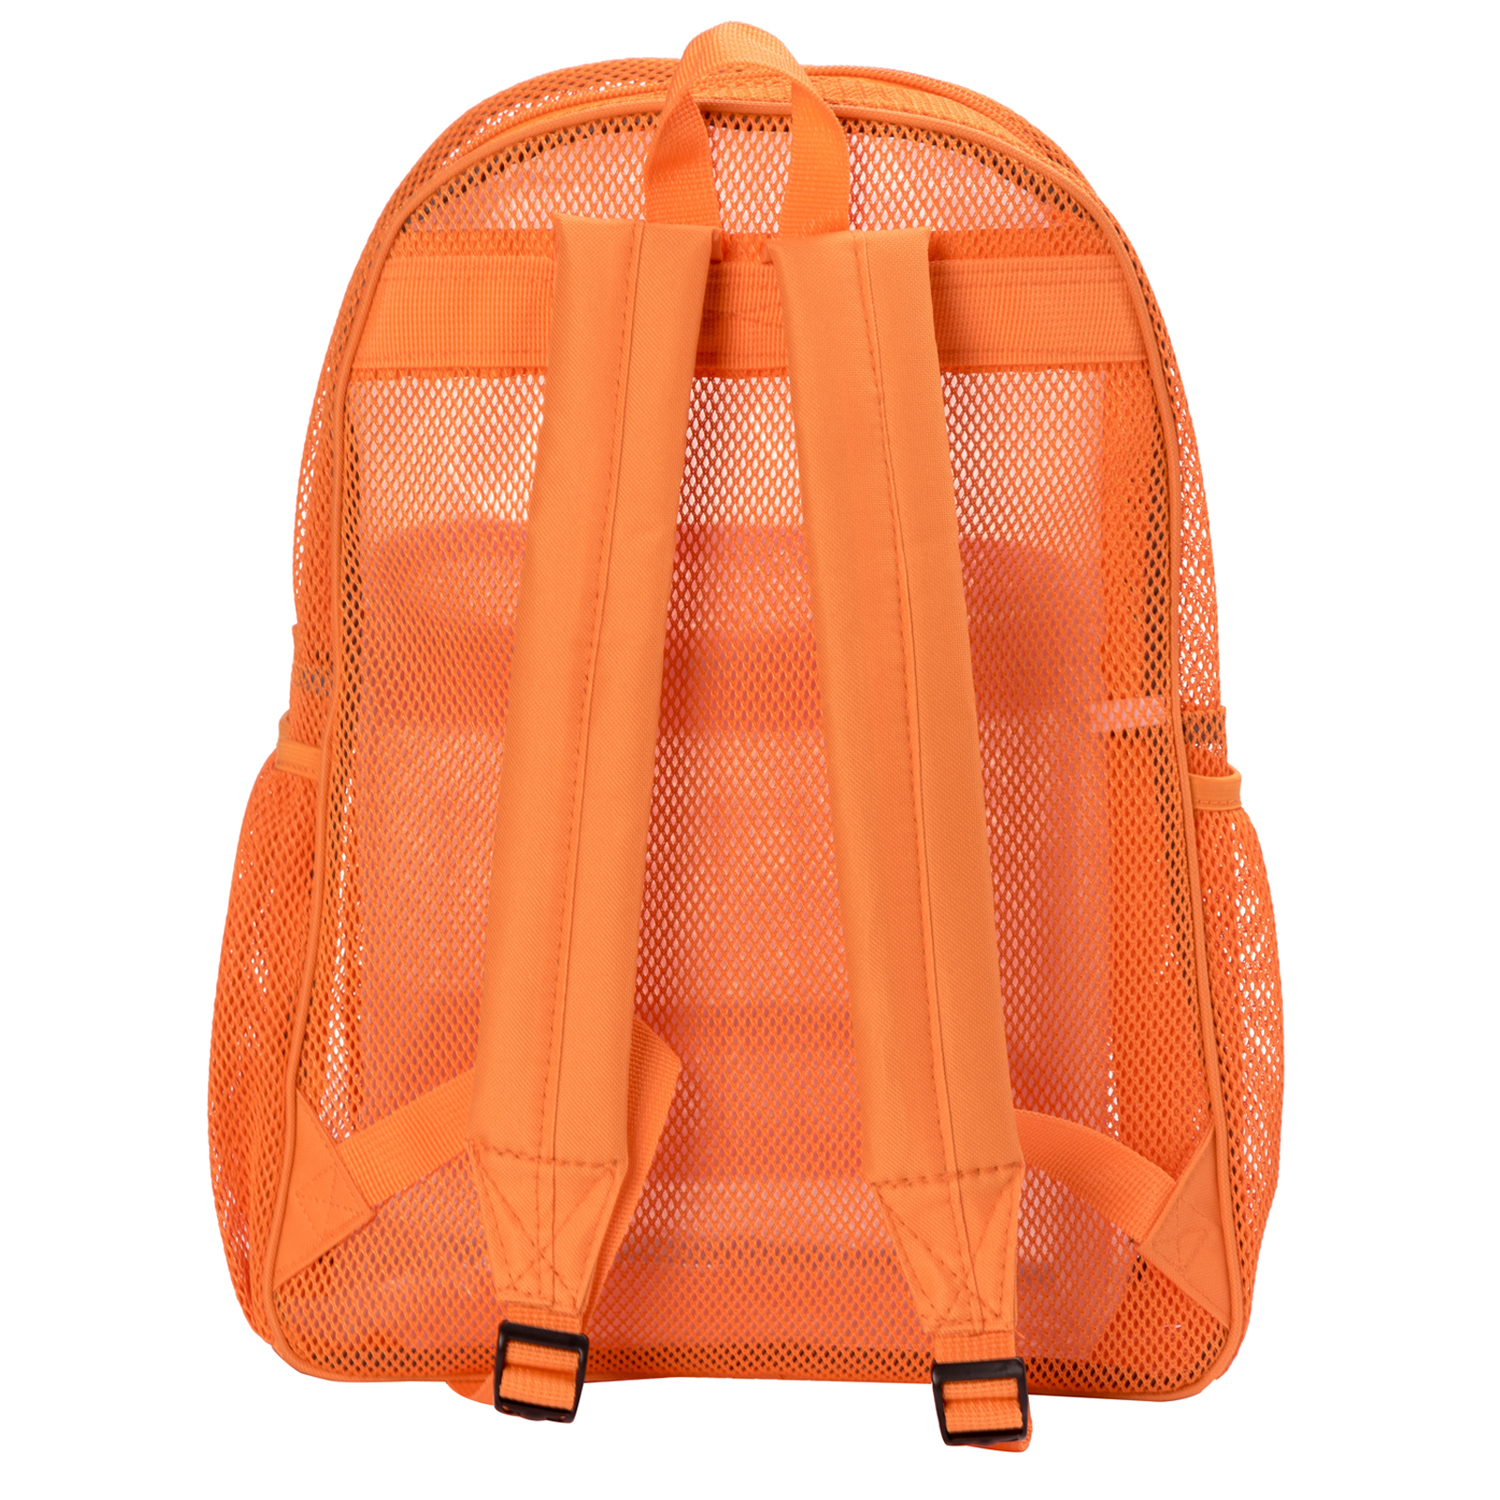 K-Cliffs Unisex Heavy Duty Classic Gym Student Mesh See Through Netting Backpack - image 2 of 6